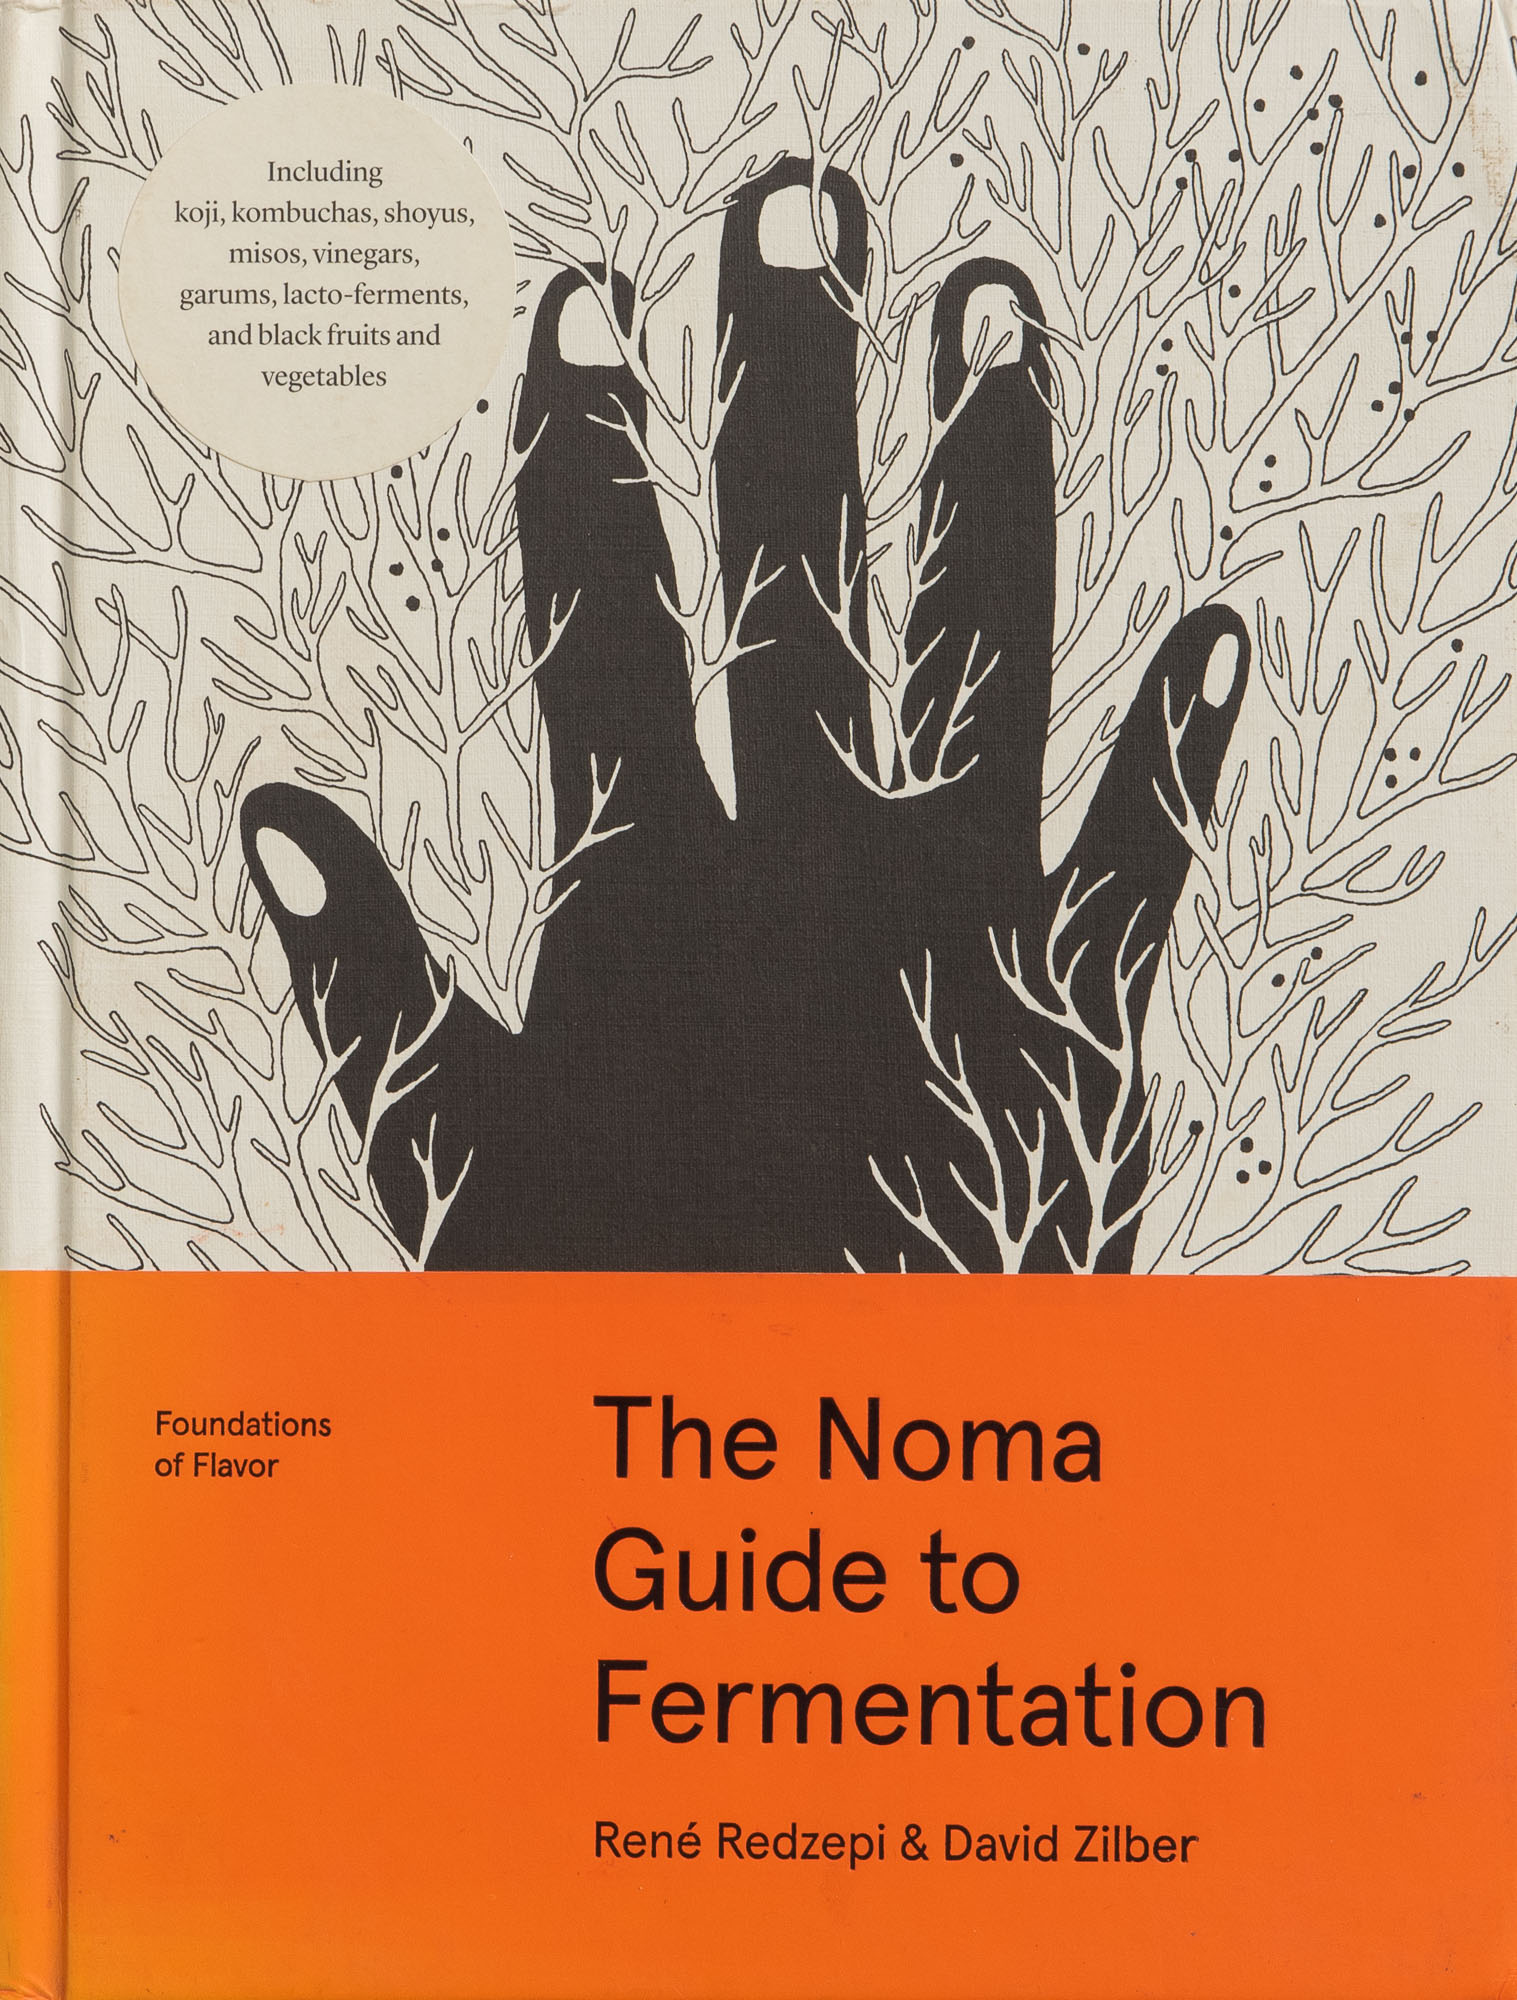 The Cover of the cookbook The Noma Guide to Fermentation